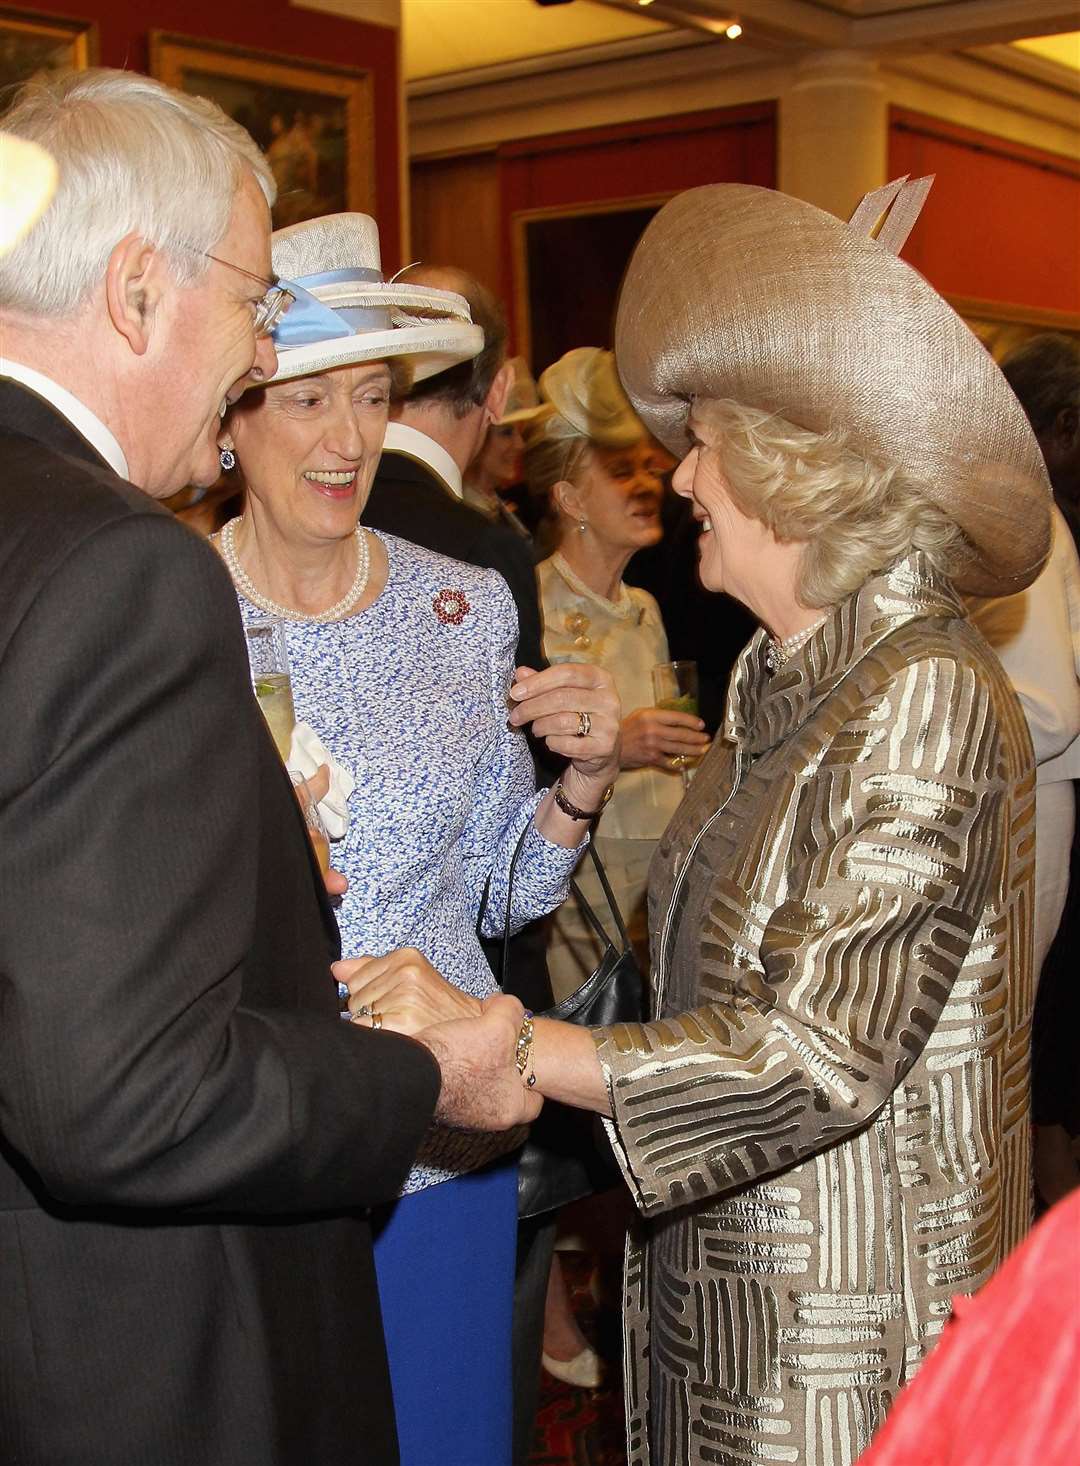 Former PM Sir John Major, Lady Susan Hussey and the Duchess of Cornwall at a reception for the Queen’s Diamond Jubilee in 2012 (PA)